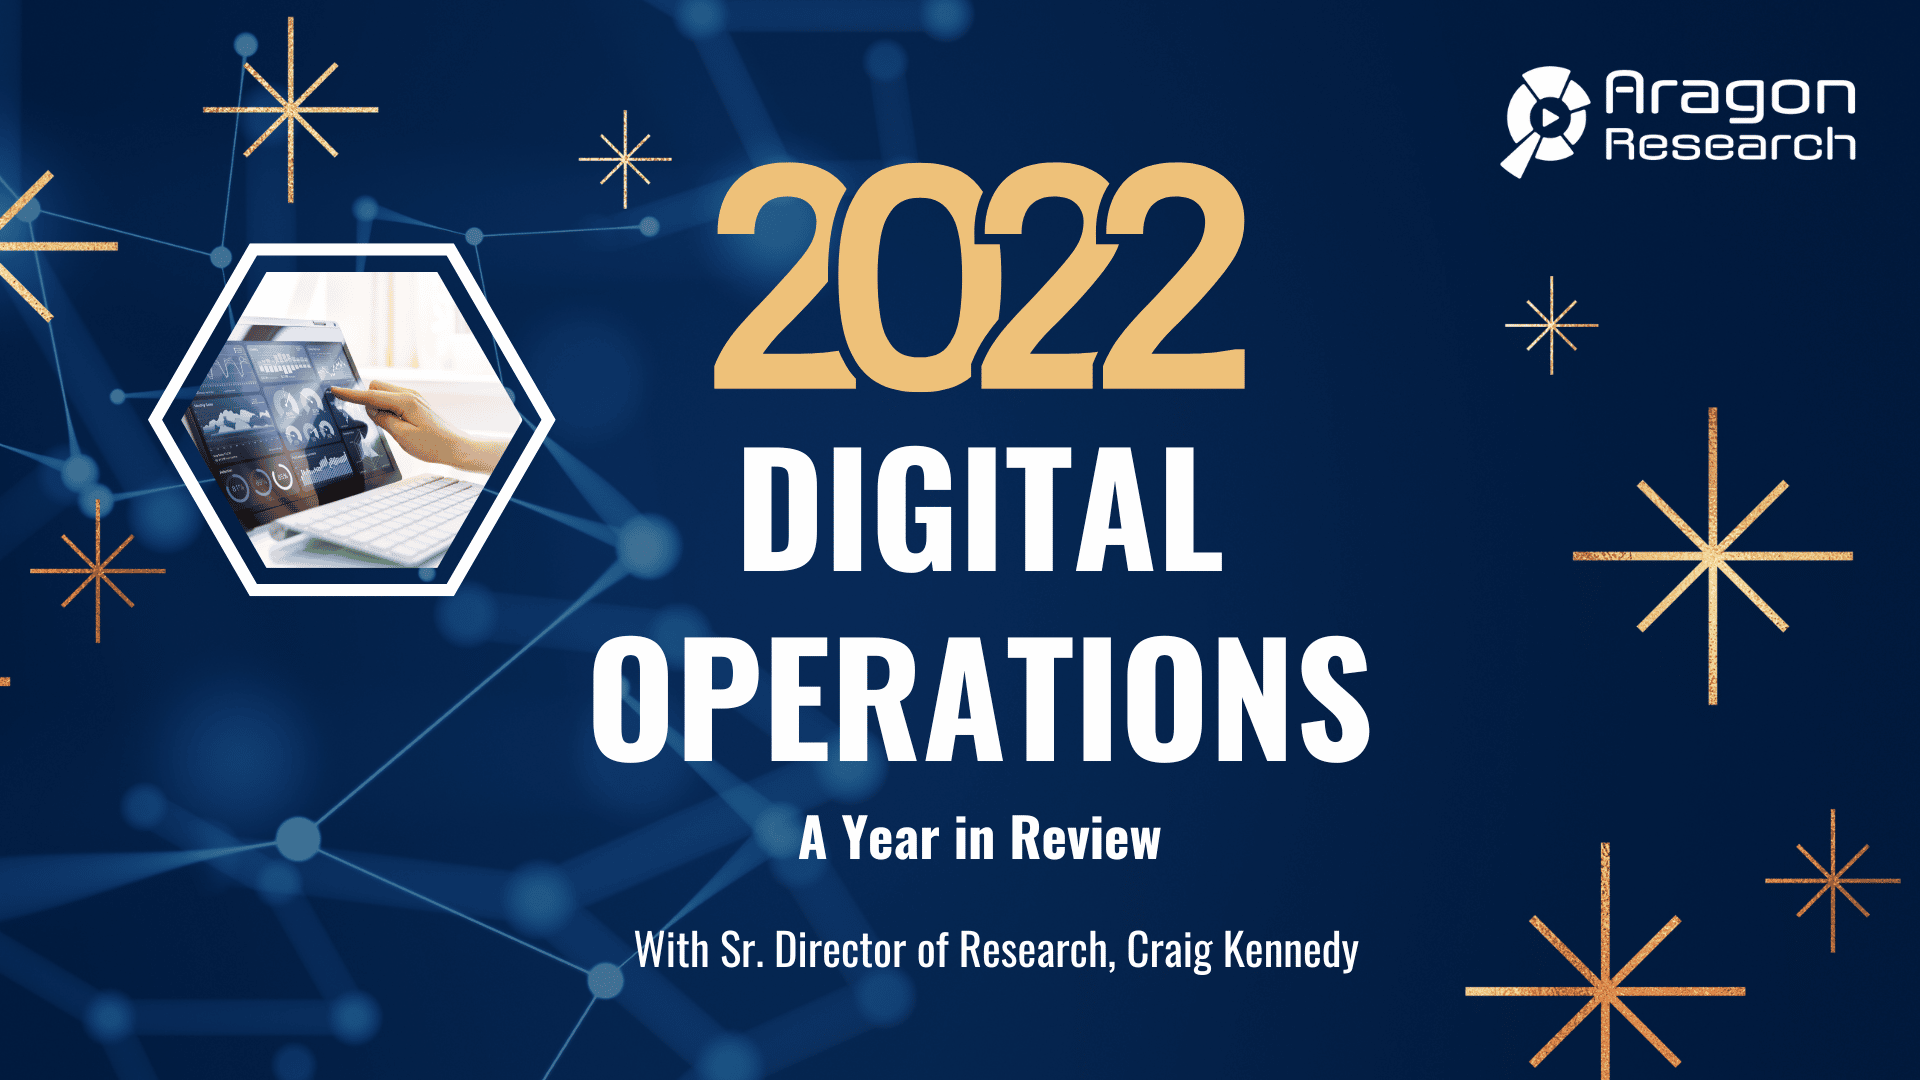 2022 Digital Operations—The Year in Review